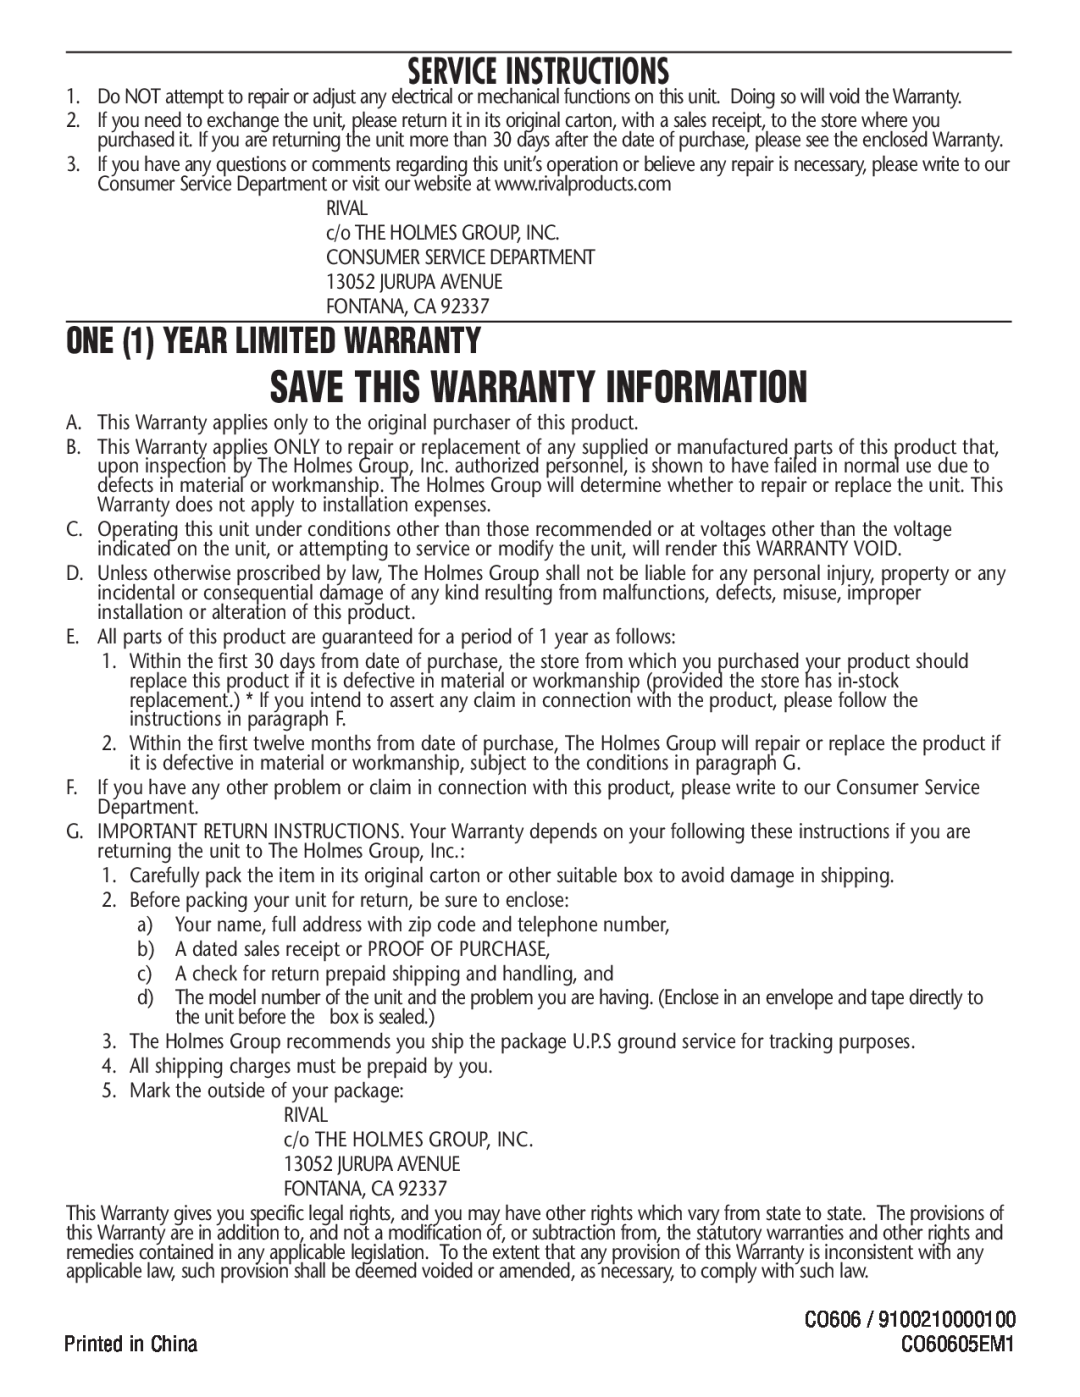 Rival CO606 manual Service Instructions, ONE 1 YEAR LIMITED WARRANTY, Save This Warranty Information 